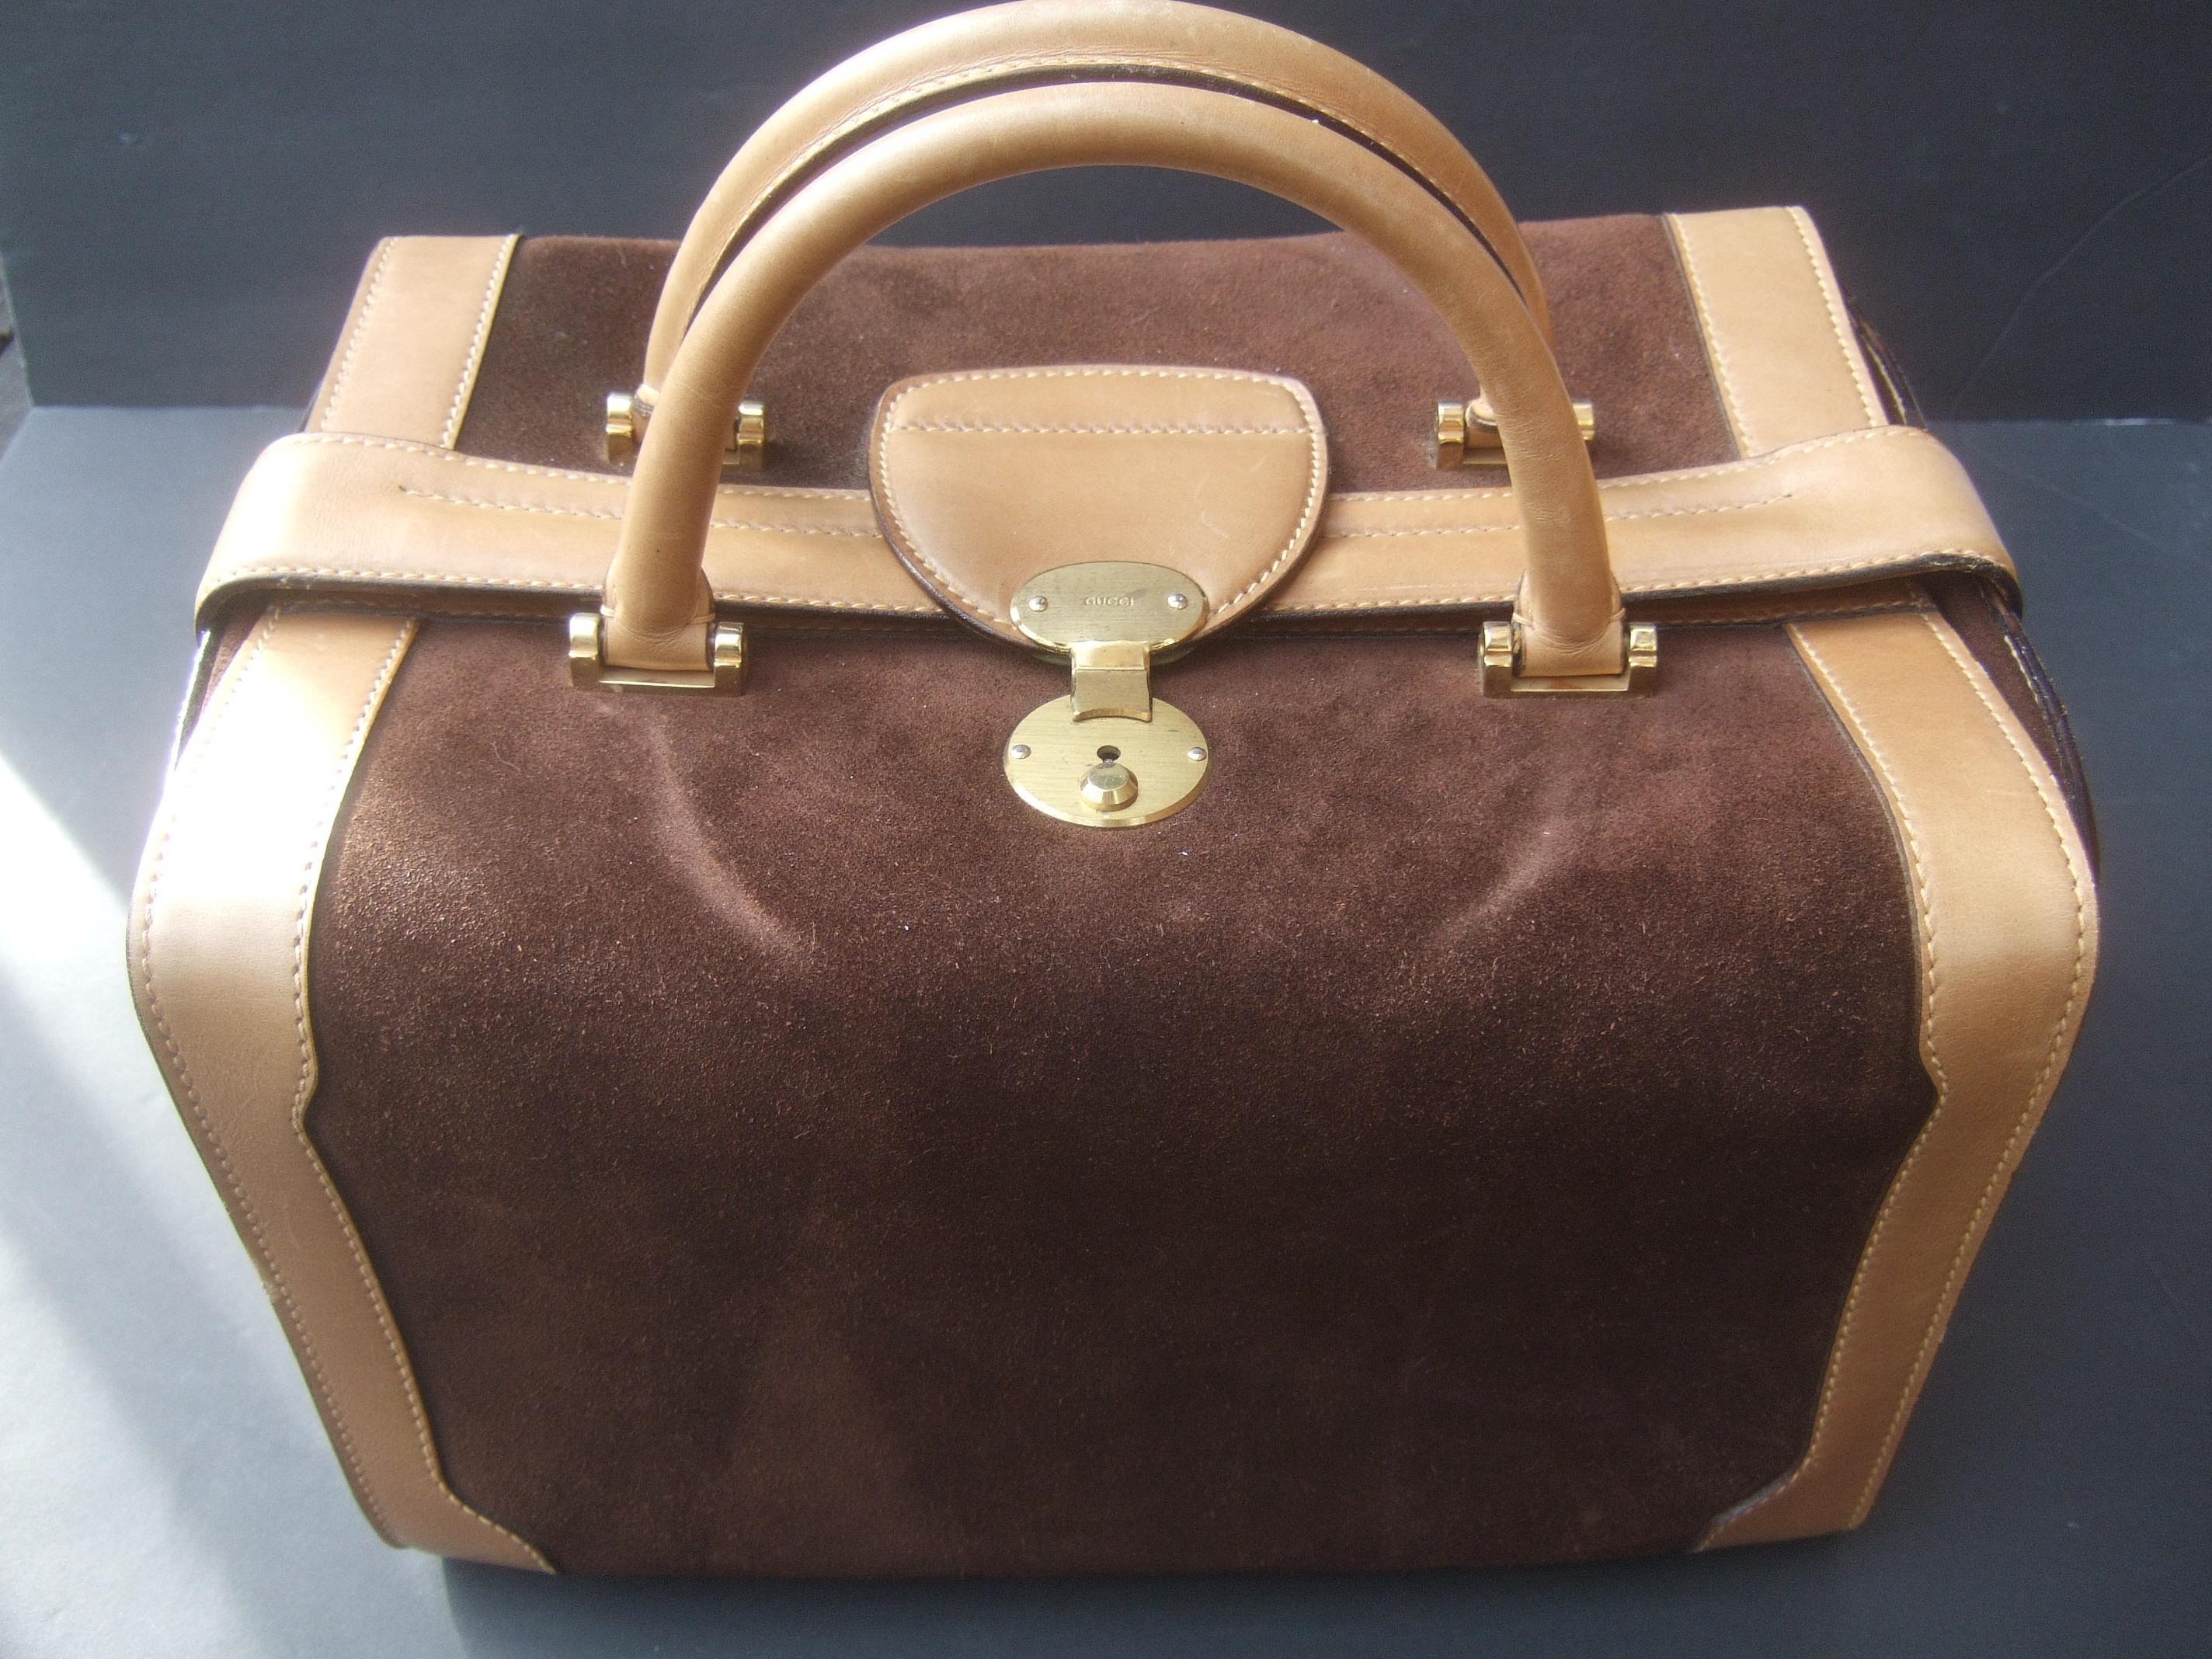 Gucci Italy Rare Chocolate Brown Suede Leather Trim Train Case c 1970s 3